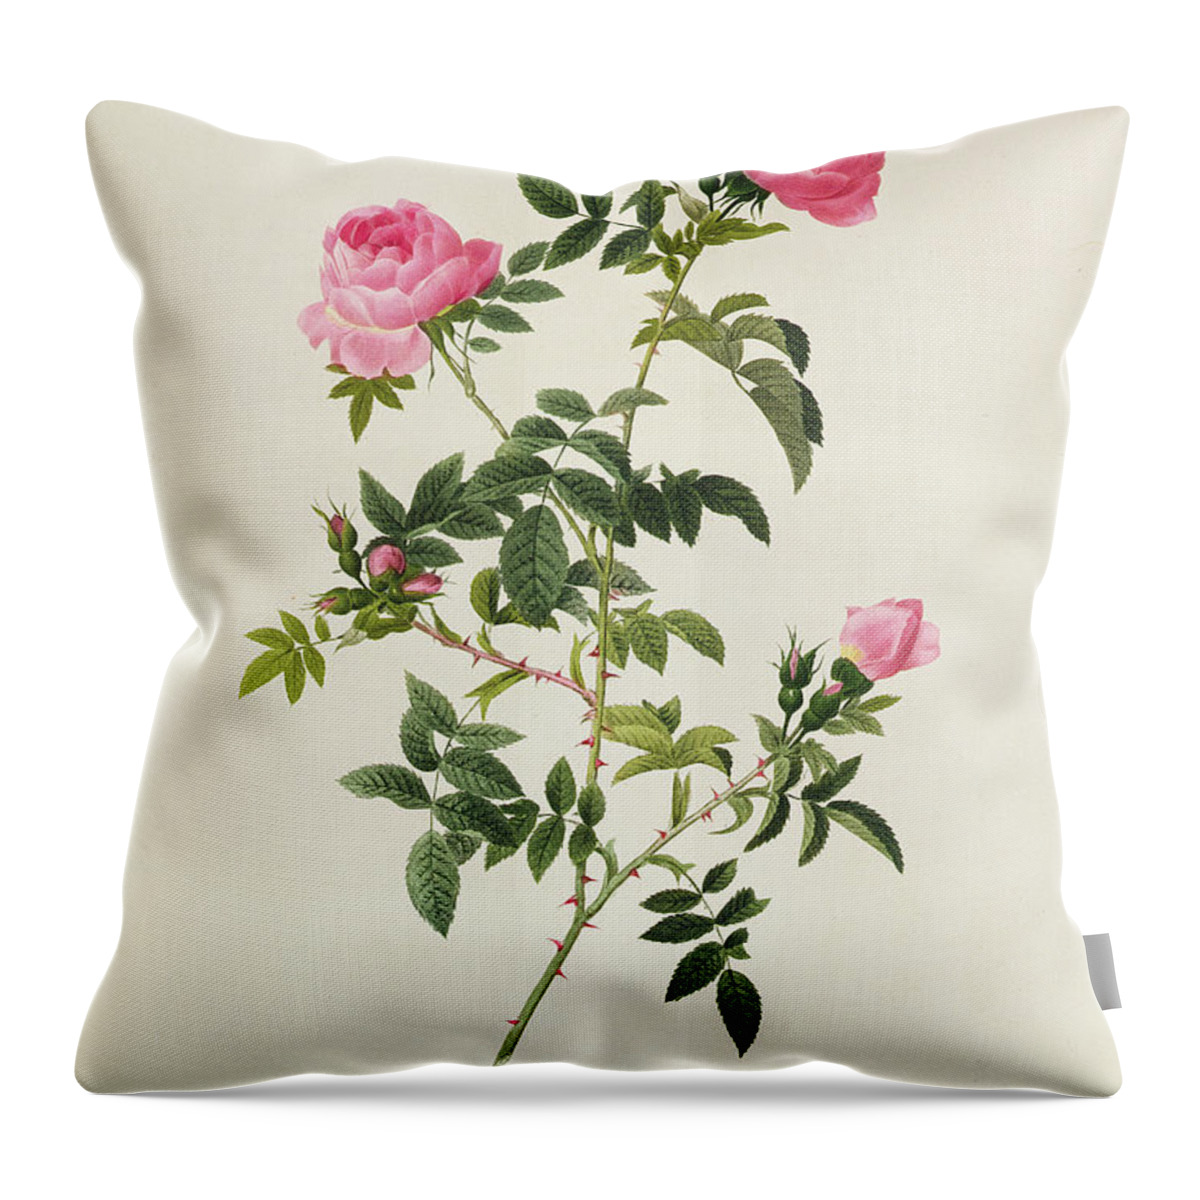 Rosa Throw Pillow featuring the drawing Rosa Sepium Flore Submultiplici by Pierre Joseph Redoute